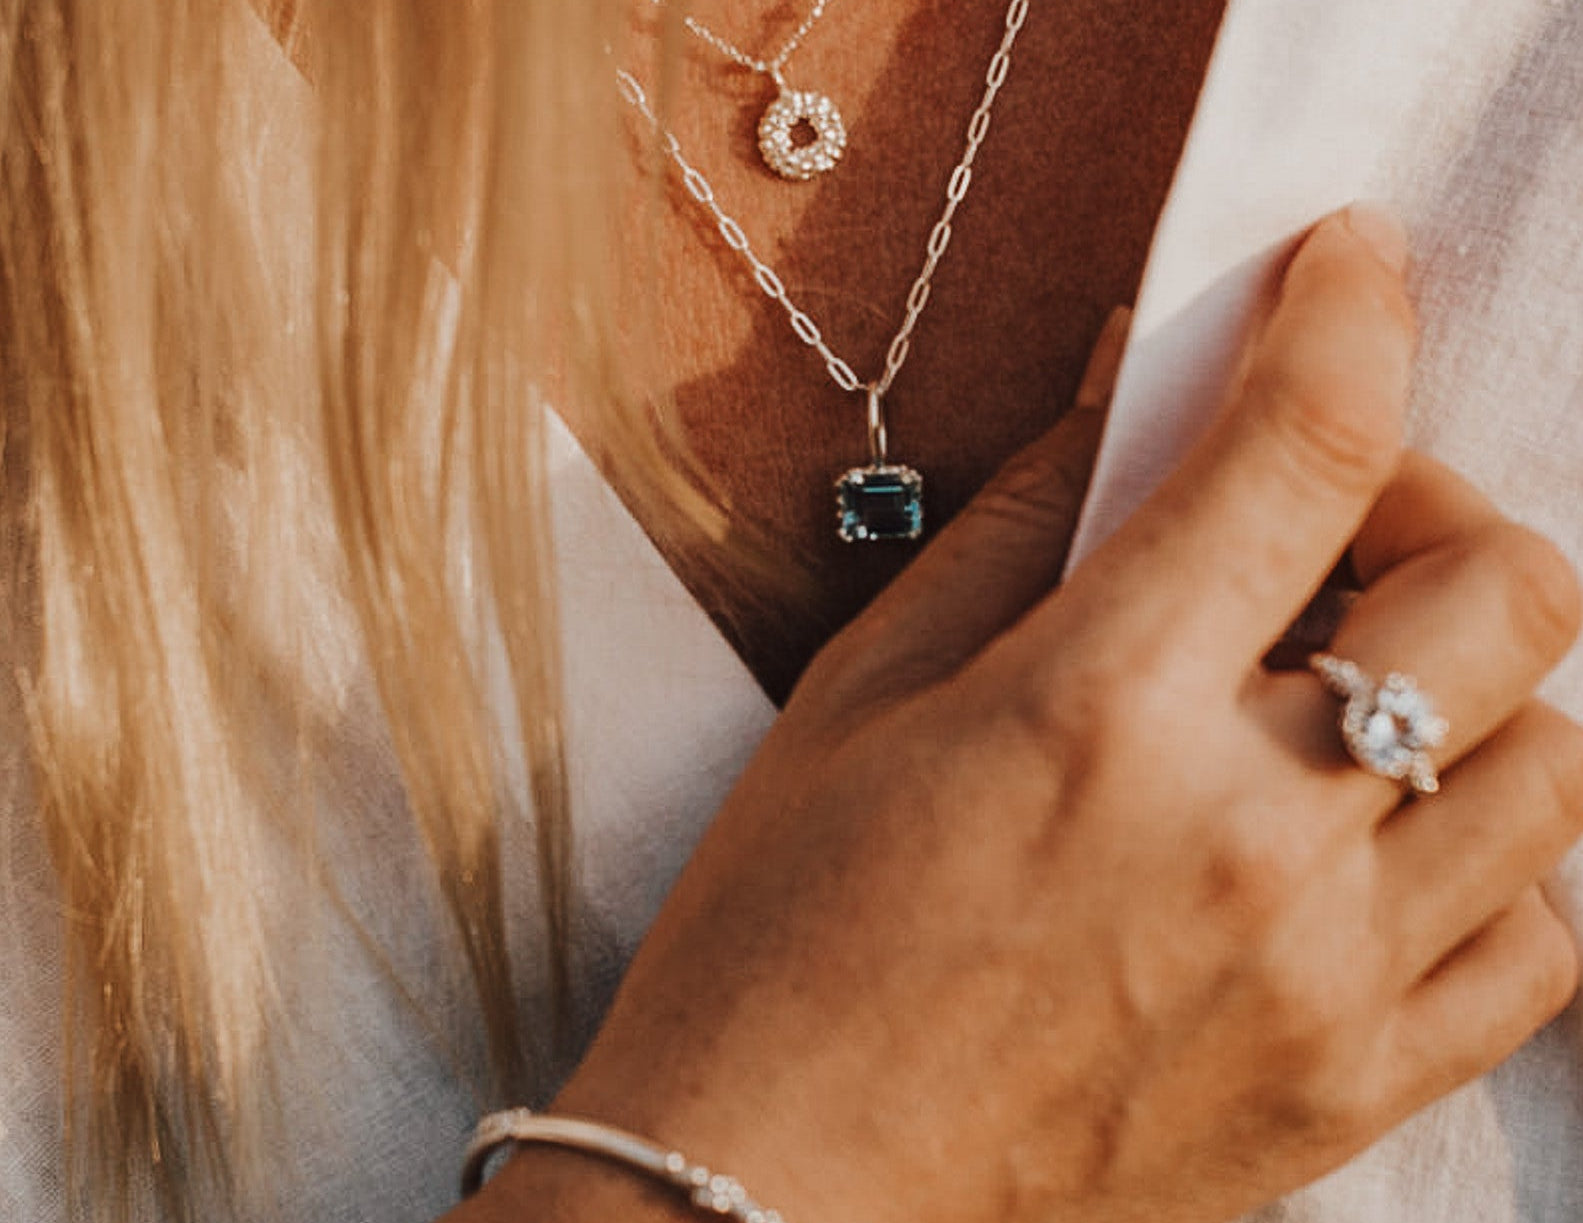 How can jewellery boost your confidence? - Dainty London